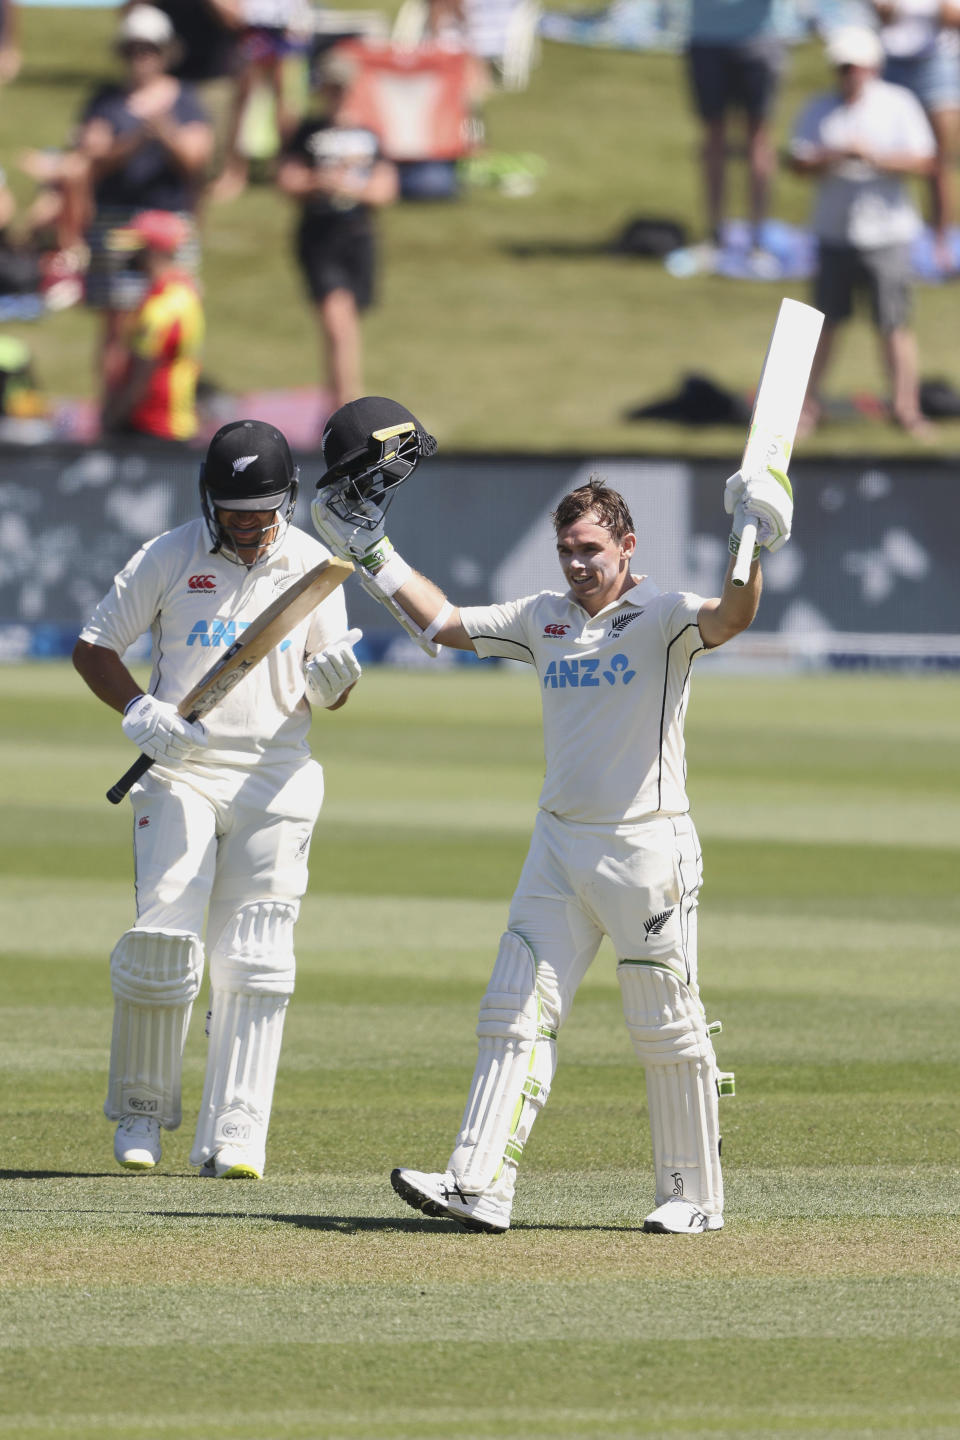 Tom Latham of New Zealand celebrates his 200 runs on day two of the second cricket test between Bangladesh and New Zealand at Hagley Oval in Christchurch, New Zealand, Monday, Jan. 10, 2022. (Martin Hunter/Photosport via AP)